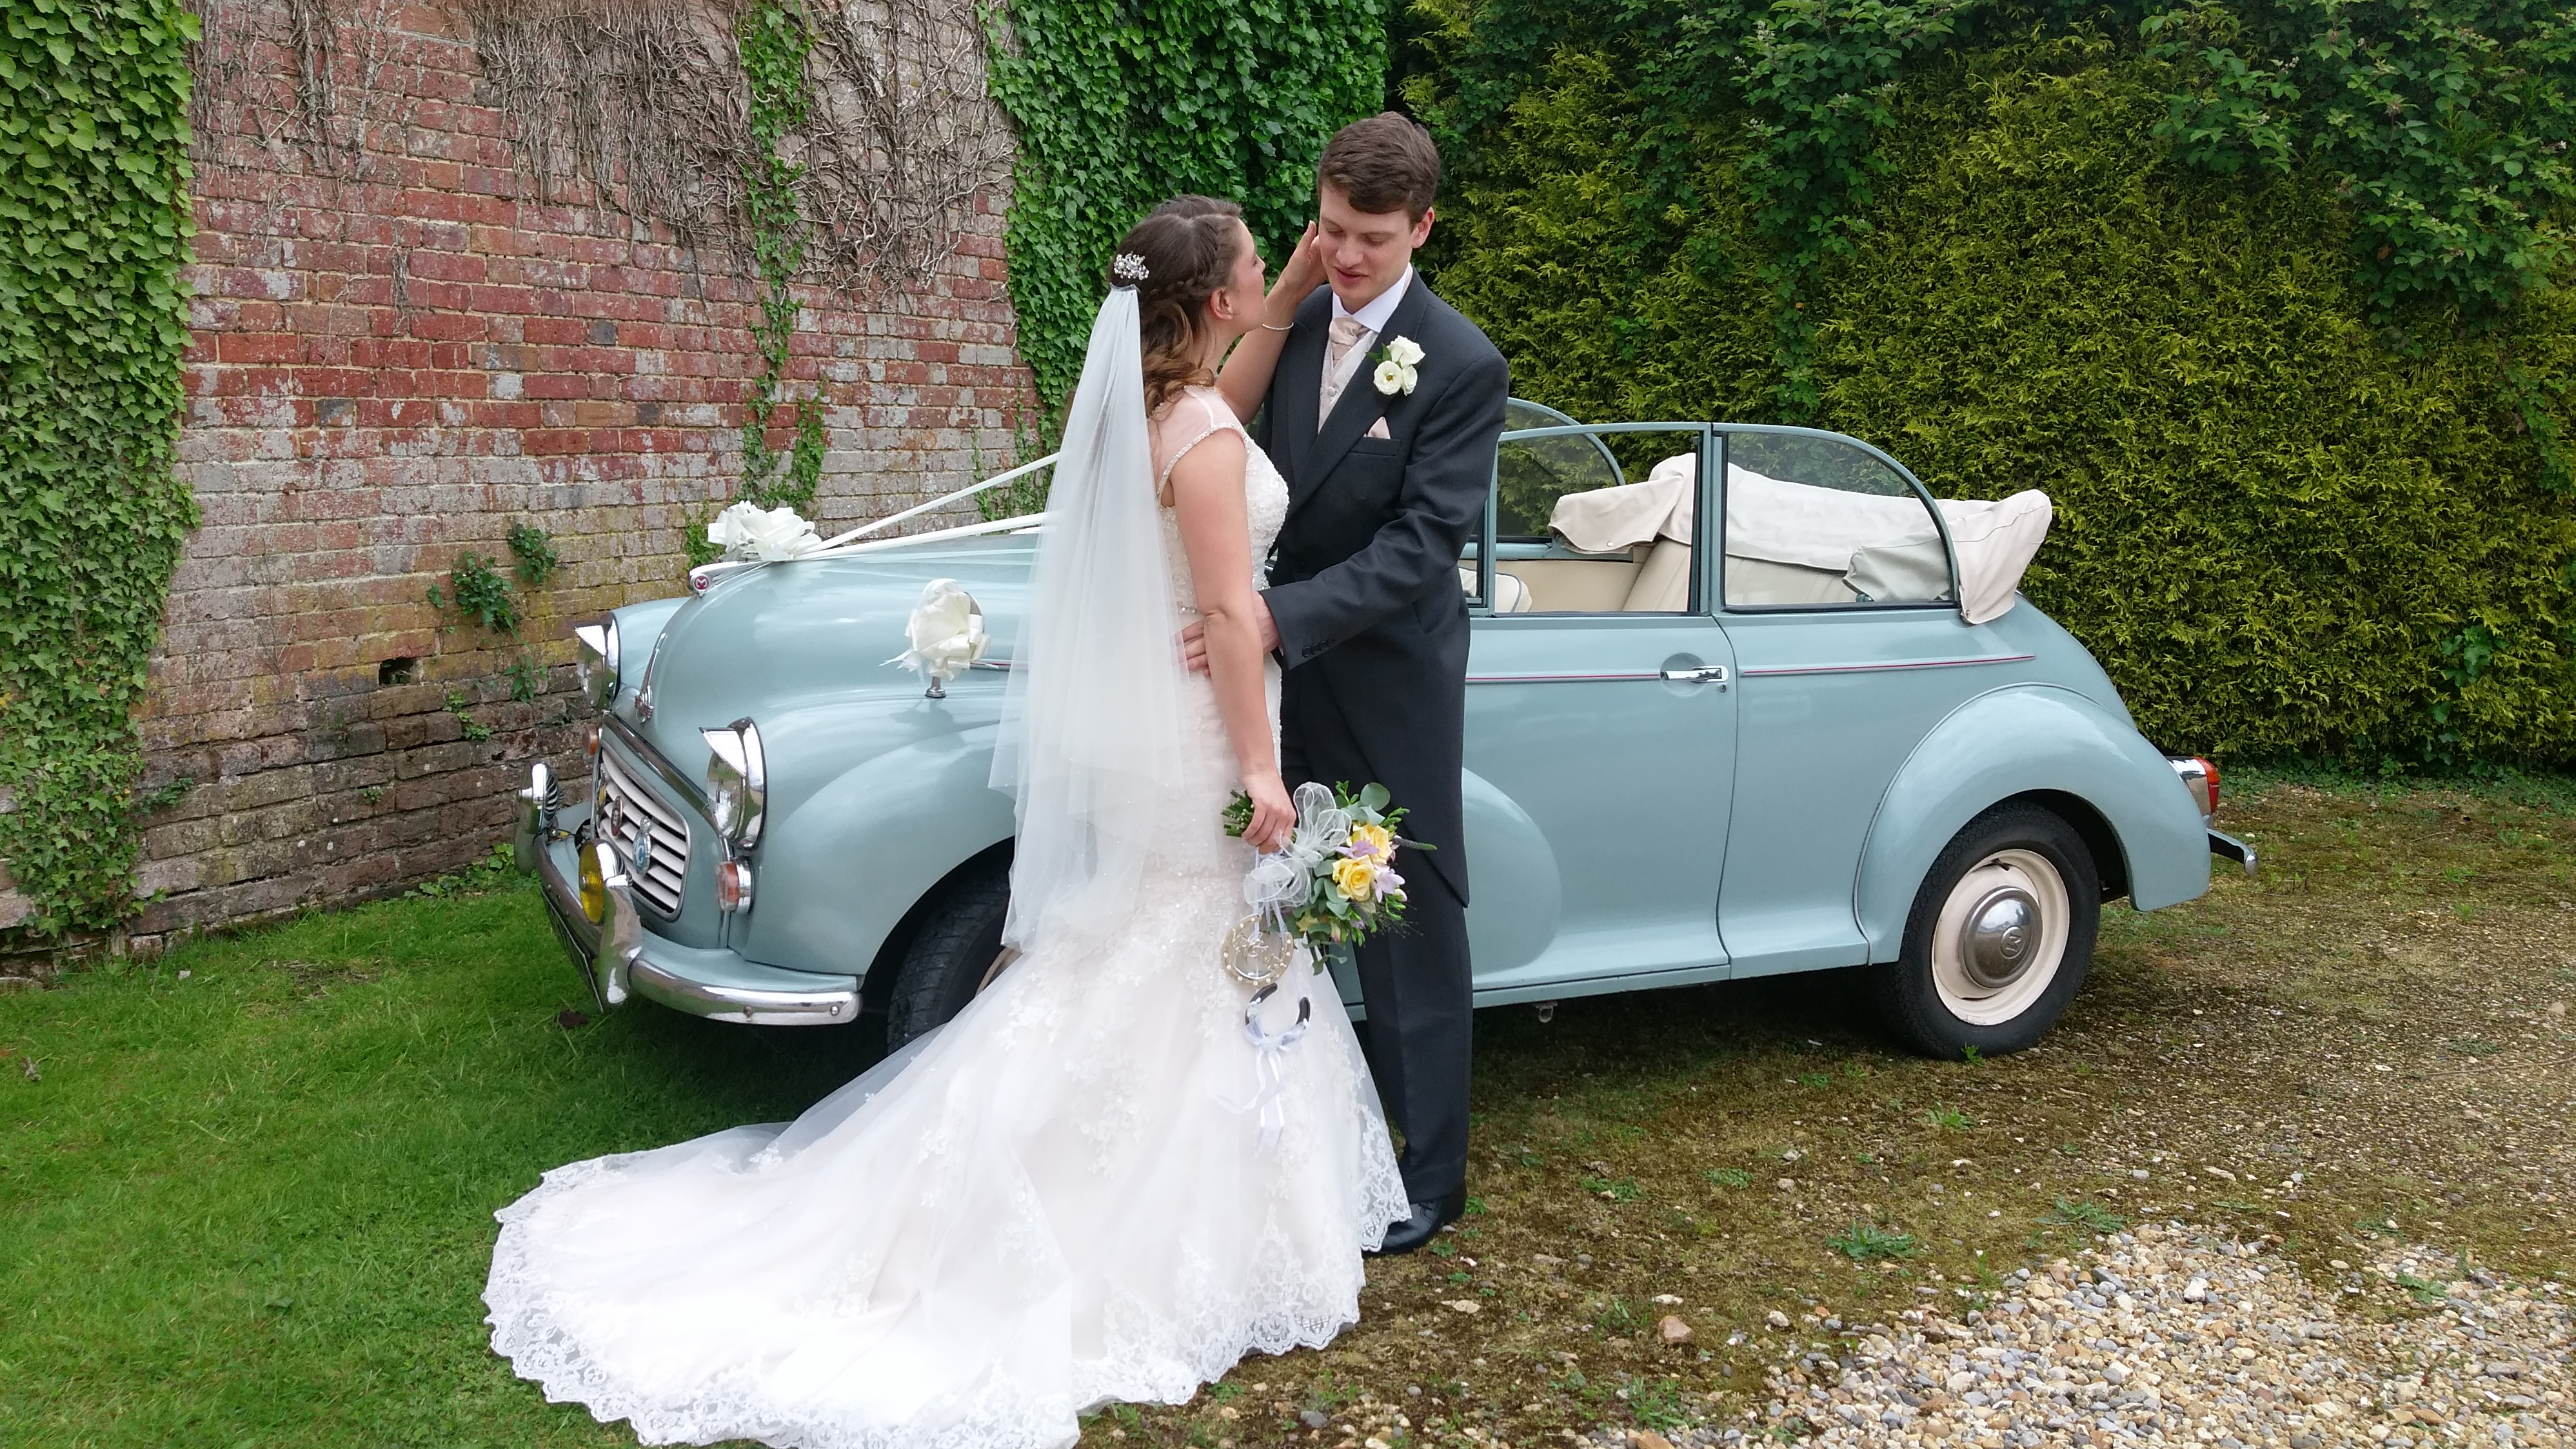 Hook-based Classic Morris Minor with ribbons and bow in light blue with its roof open showing a light cream interior. Bride and Groom are in front of the vehicle posing for their wedding photographer.